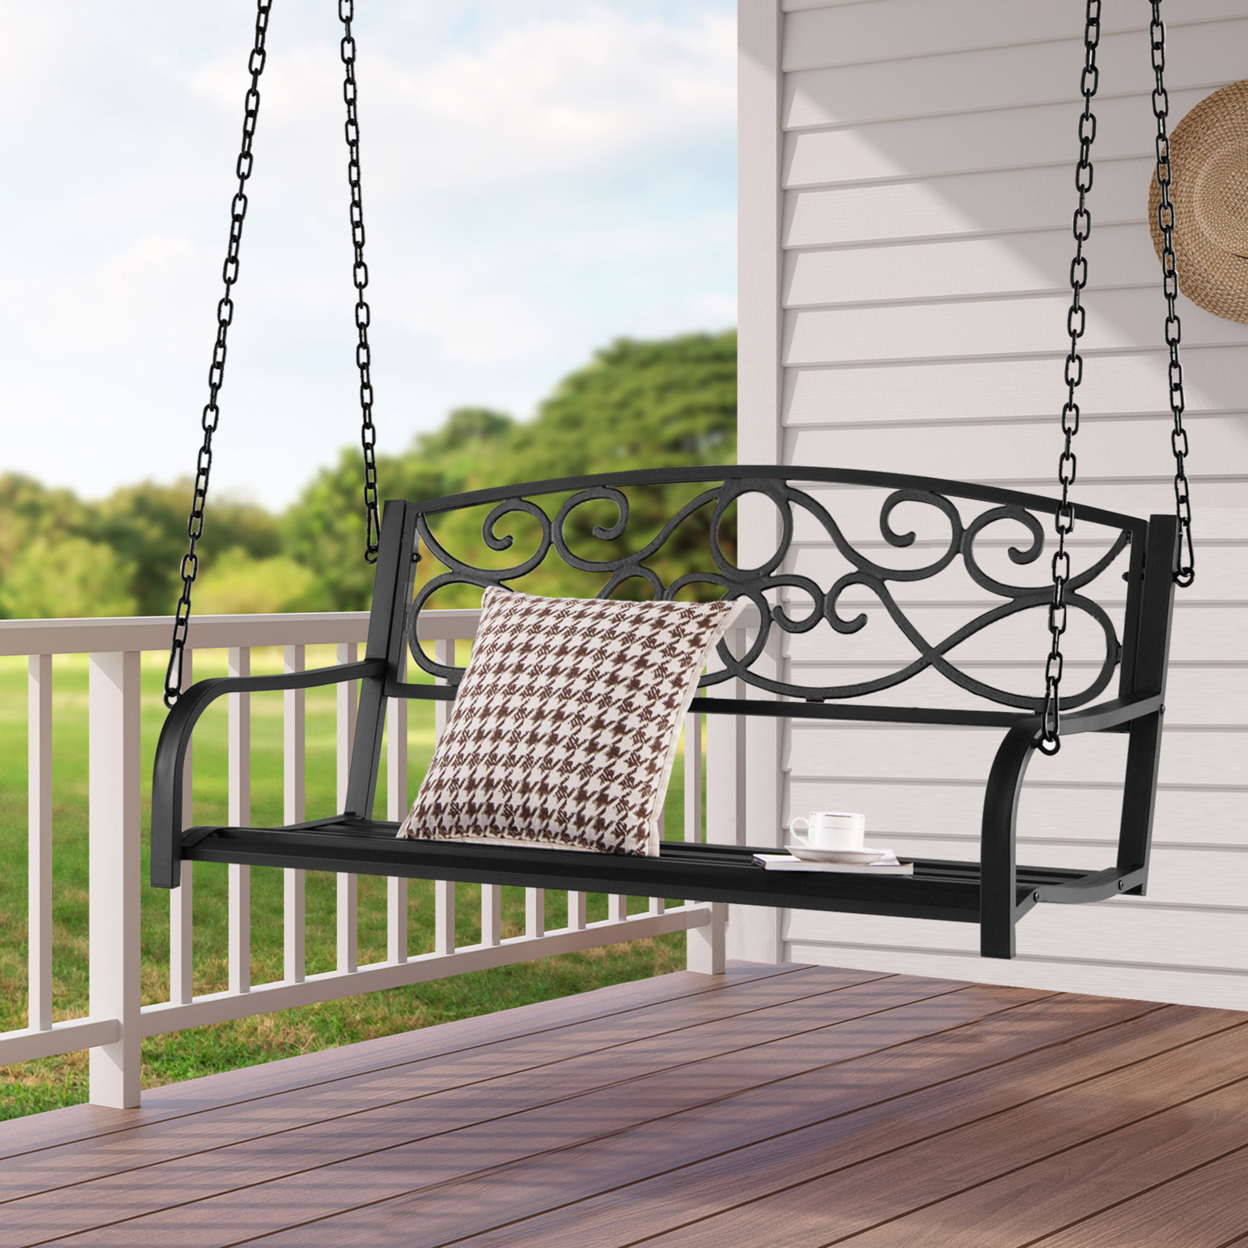 Patio Hanging Porch Swing Outdoor 2-Person Metal Swing Bench Chair W/ Chains - Black